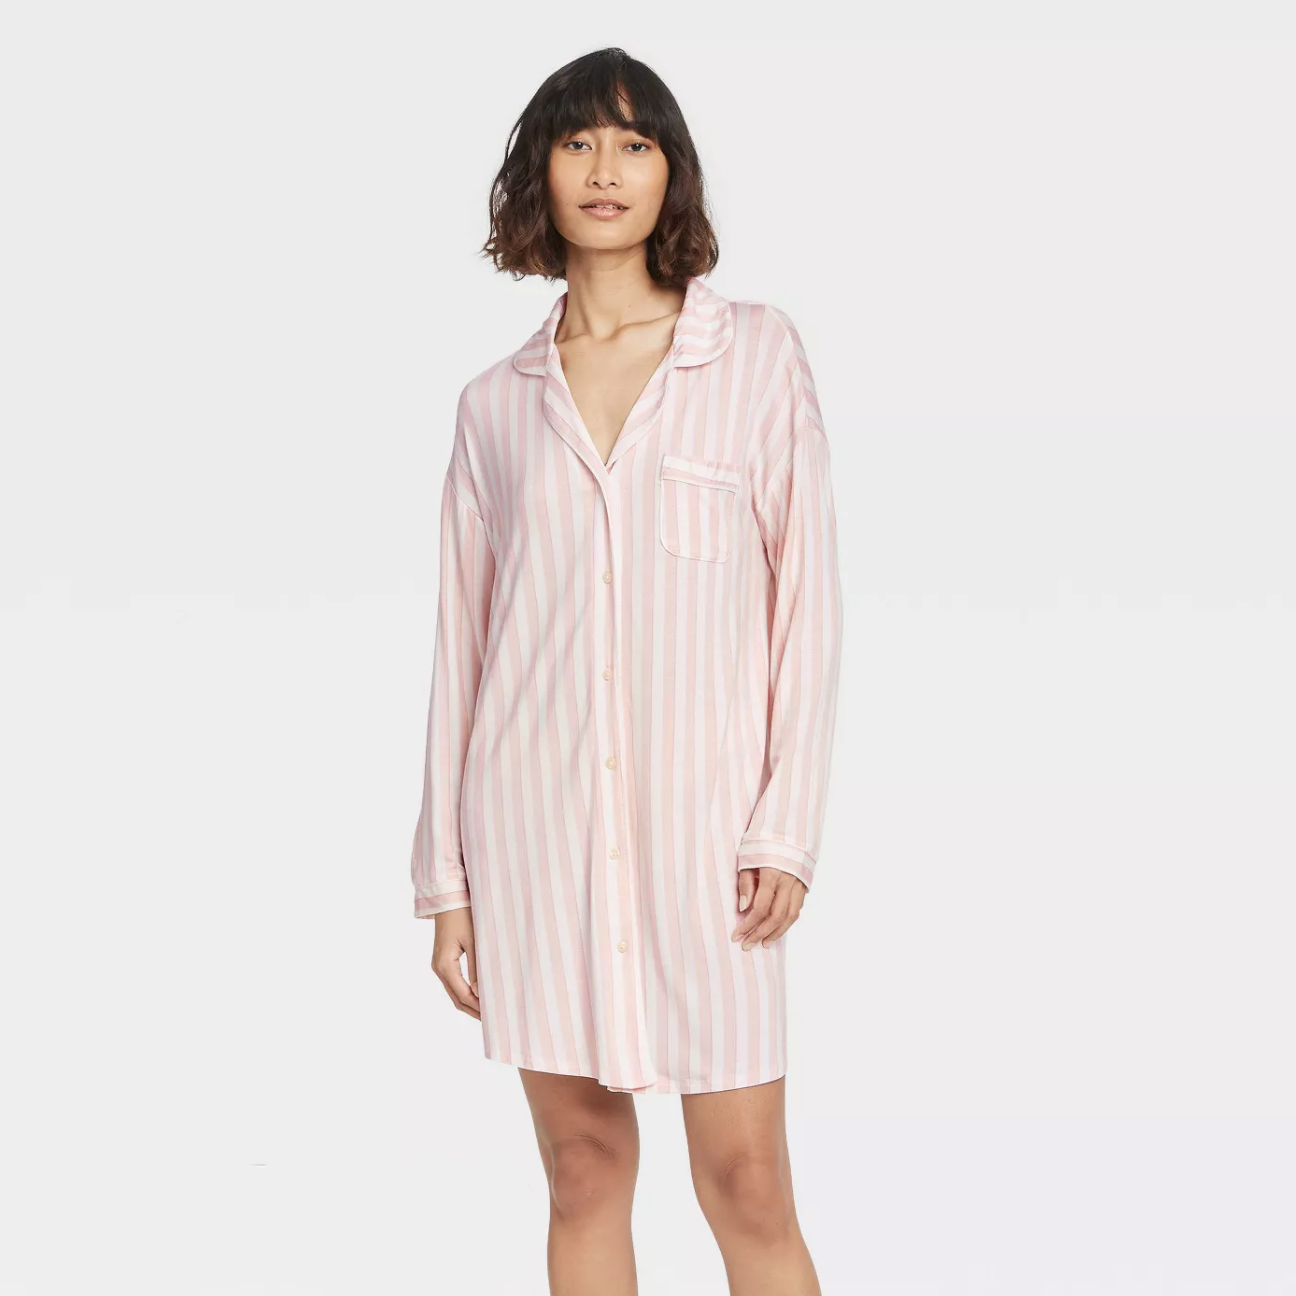 Nightgowns For Women: Best Women's Nightgowns For Summer